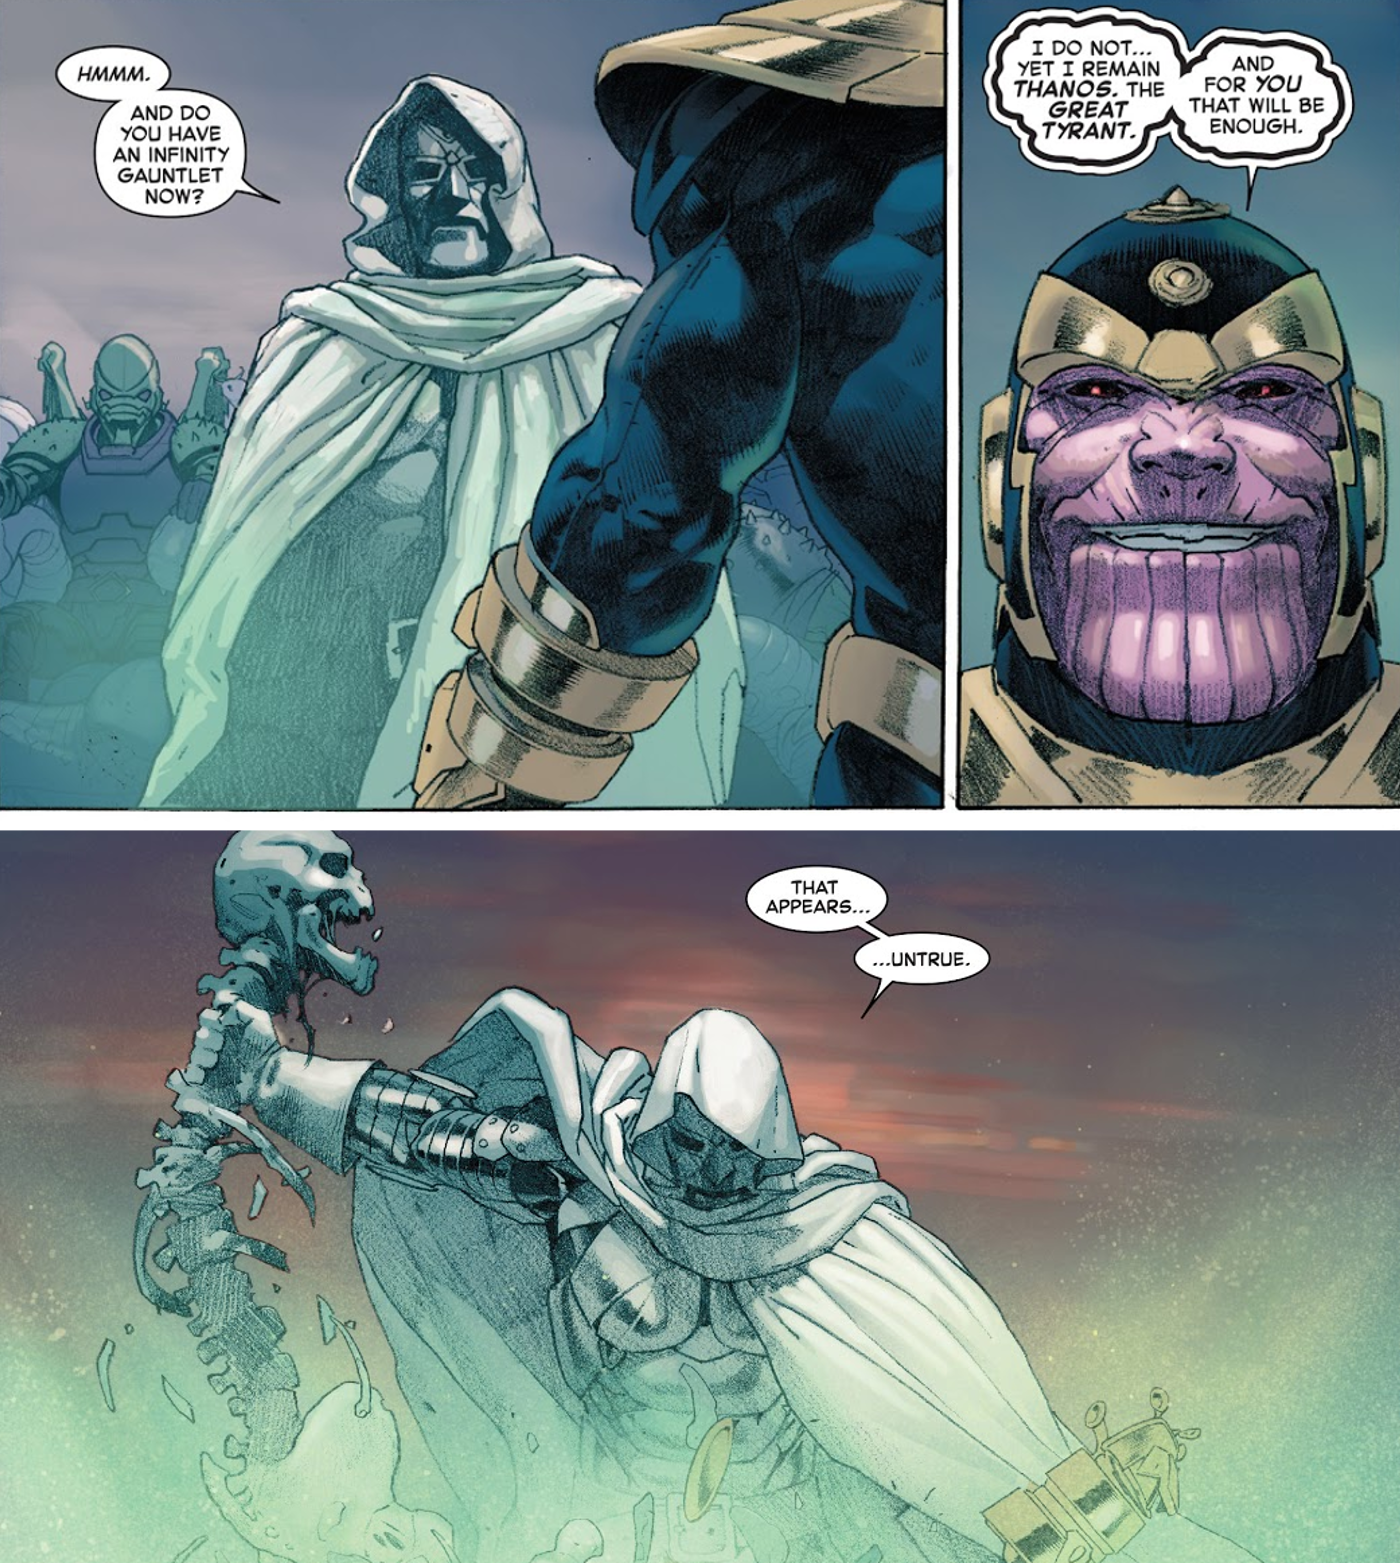 “You Are a Weak God. A Pretender”: Thanos vs Doctor Doom Fanart Shows How Their Secret Wars Fight Could Look in MCU